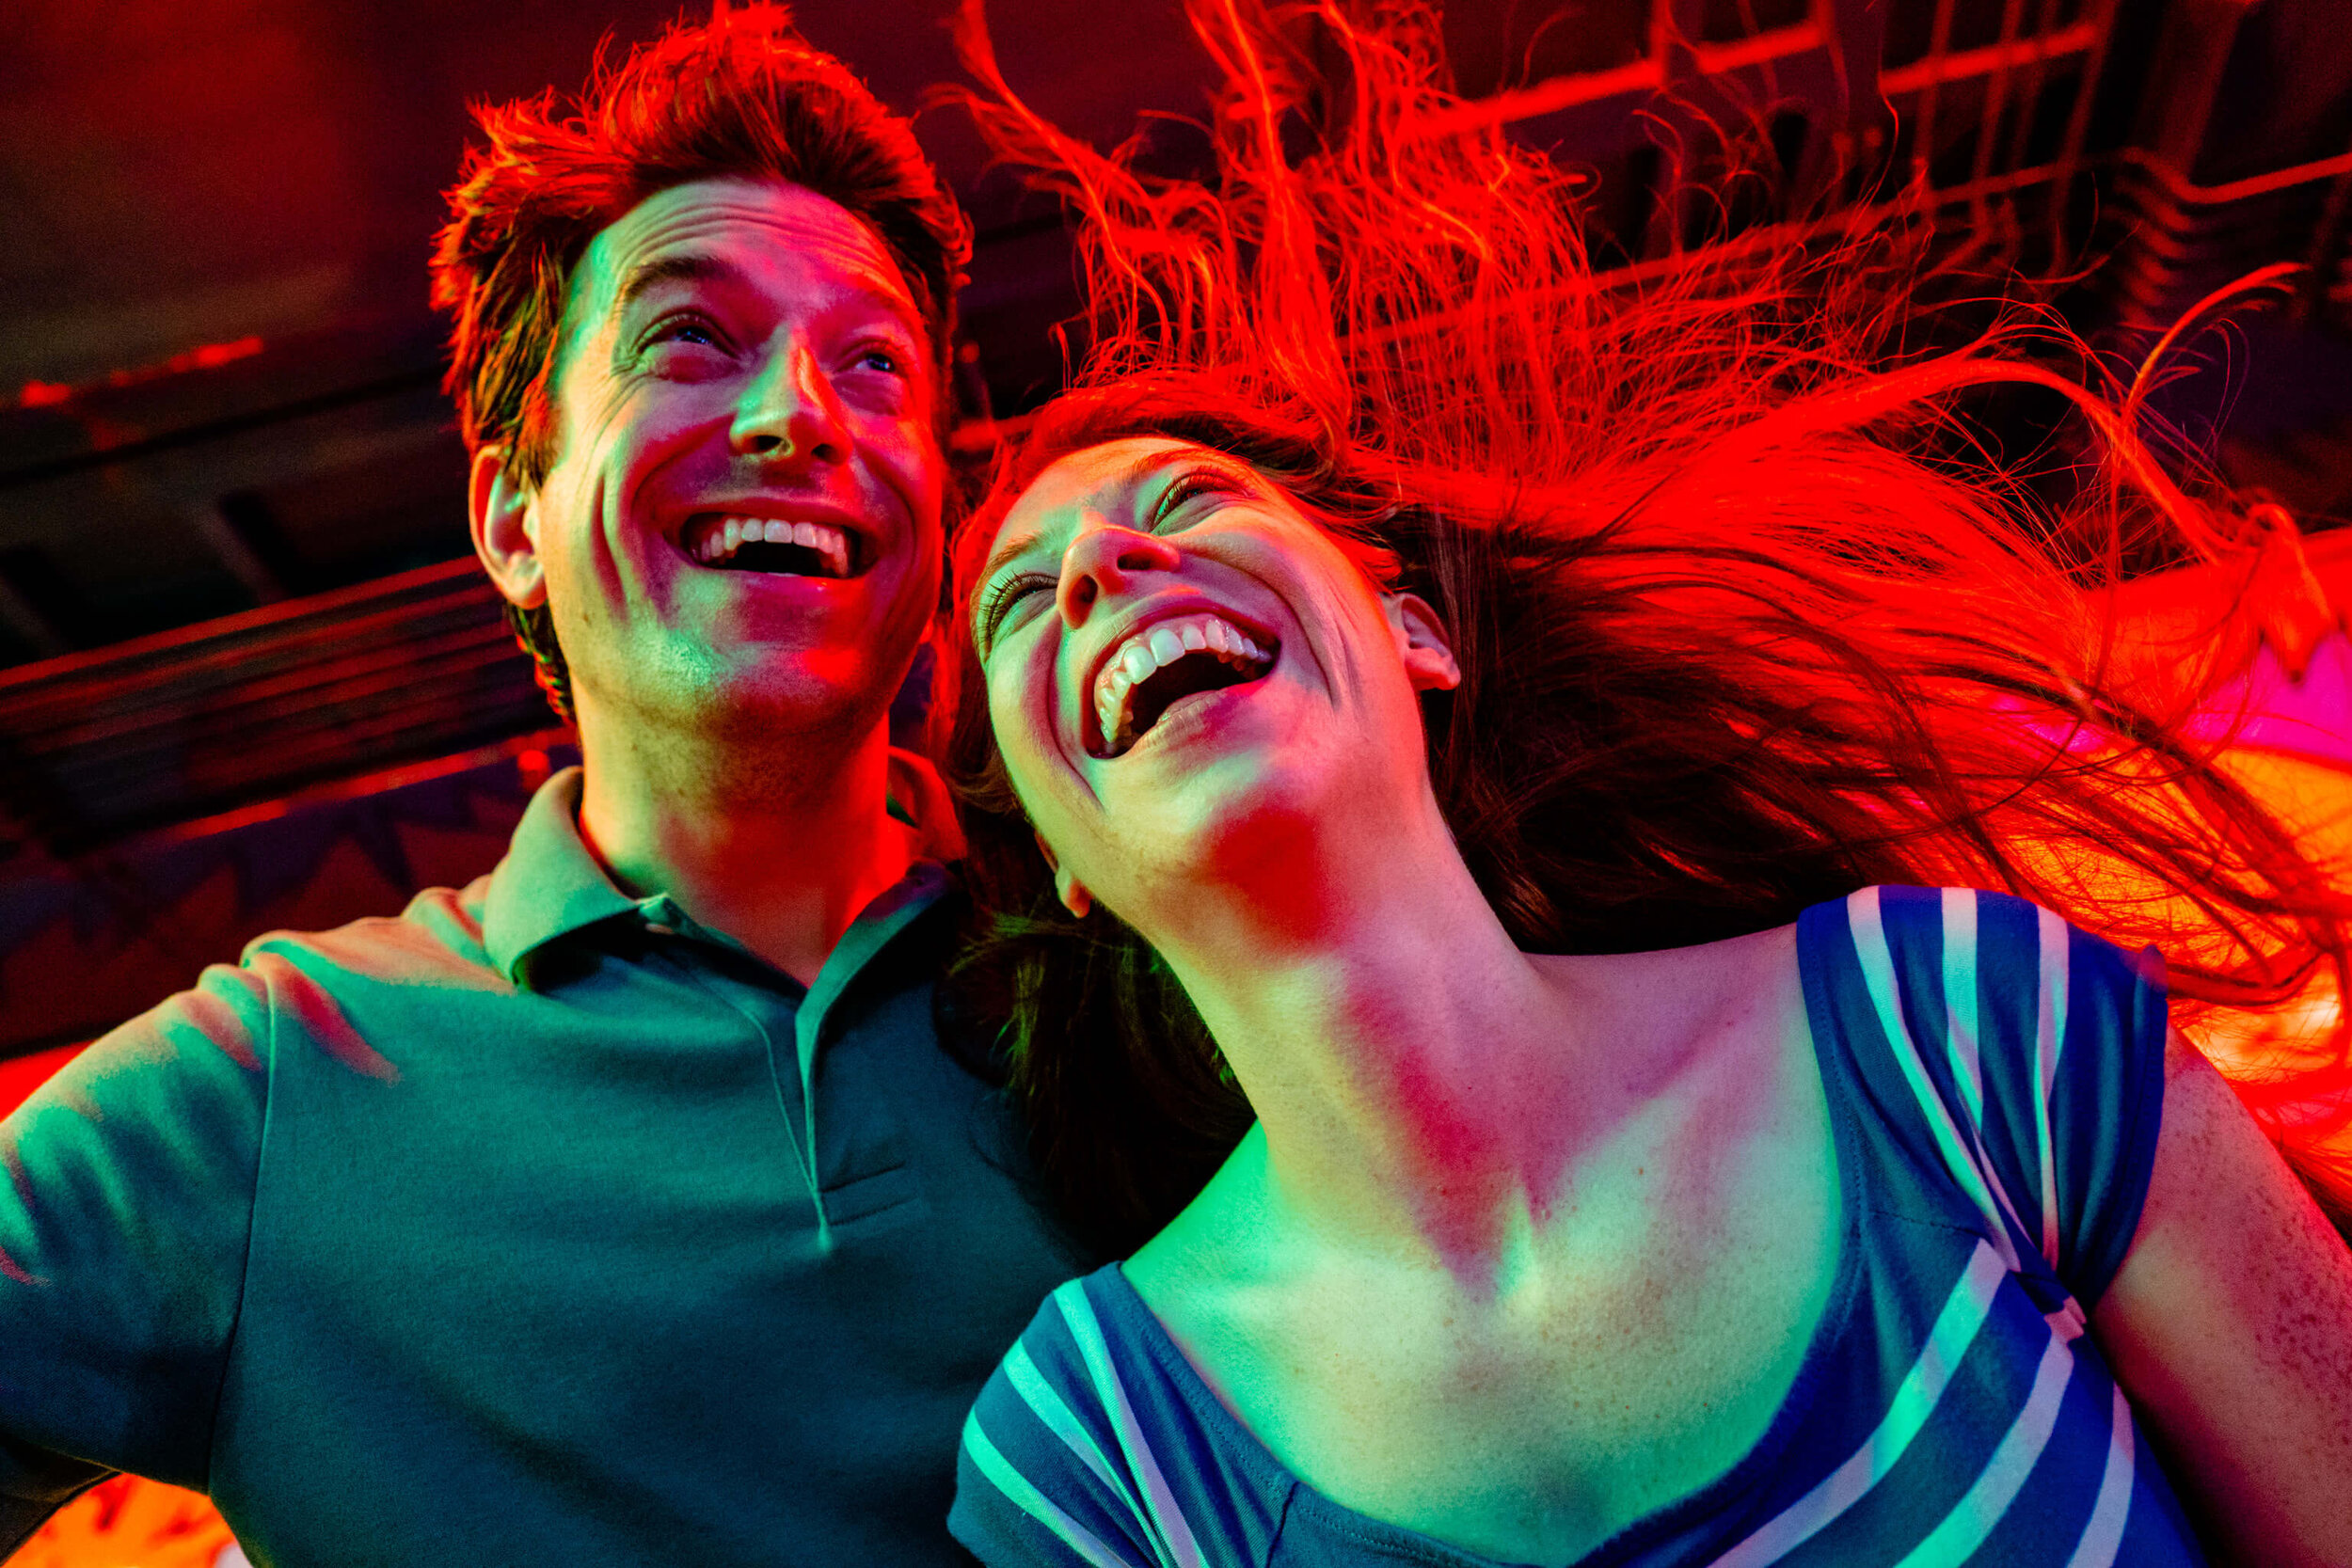 7-funfair-engagement-session-scare-house-hair-flying-red-light-photography-by-bee-two-sweet.jpg